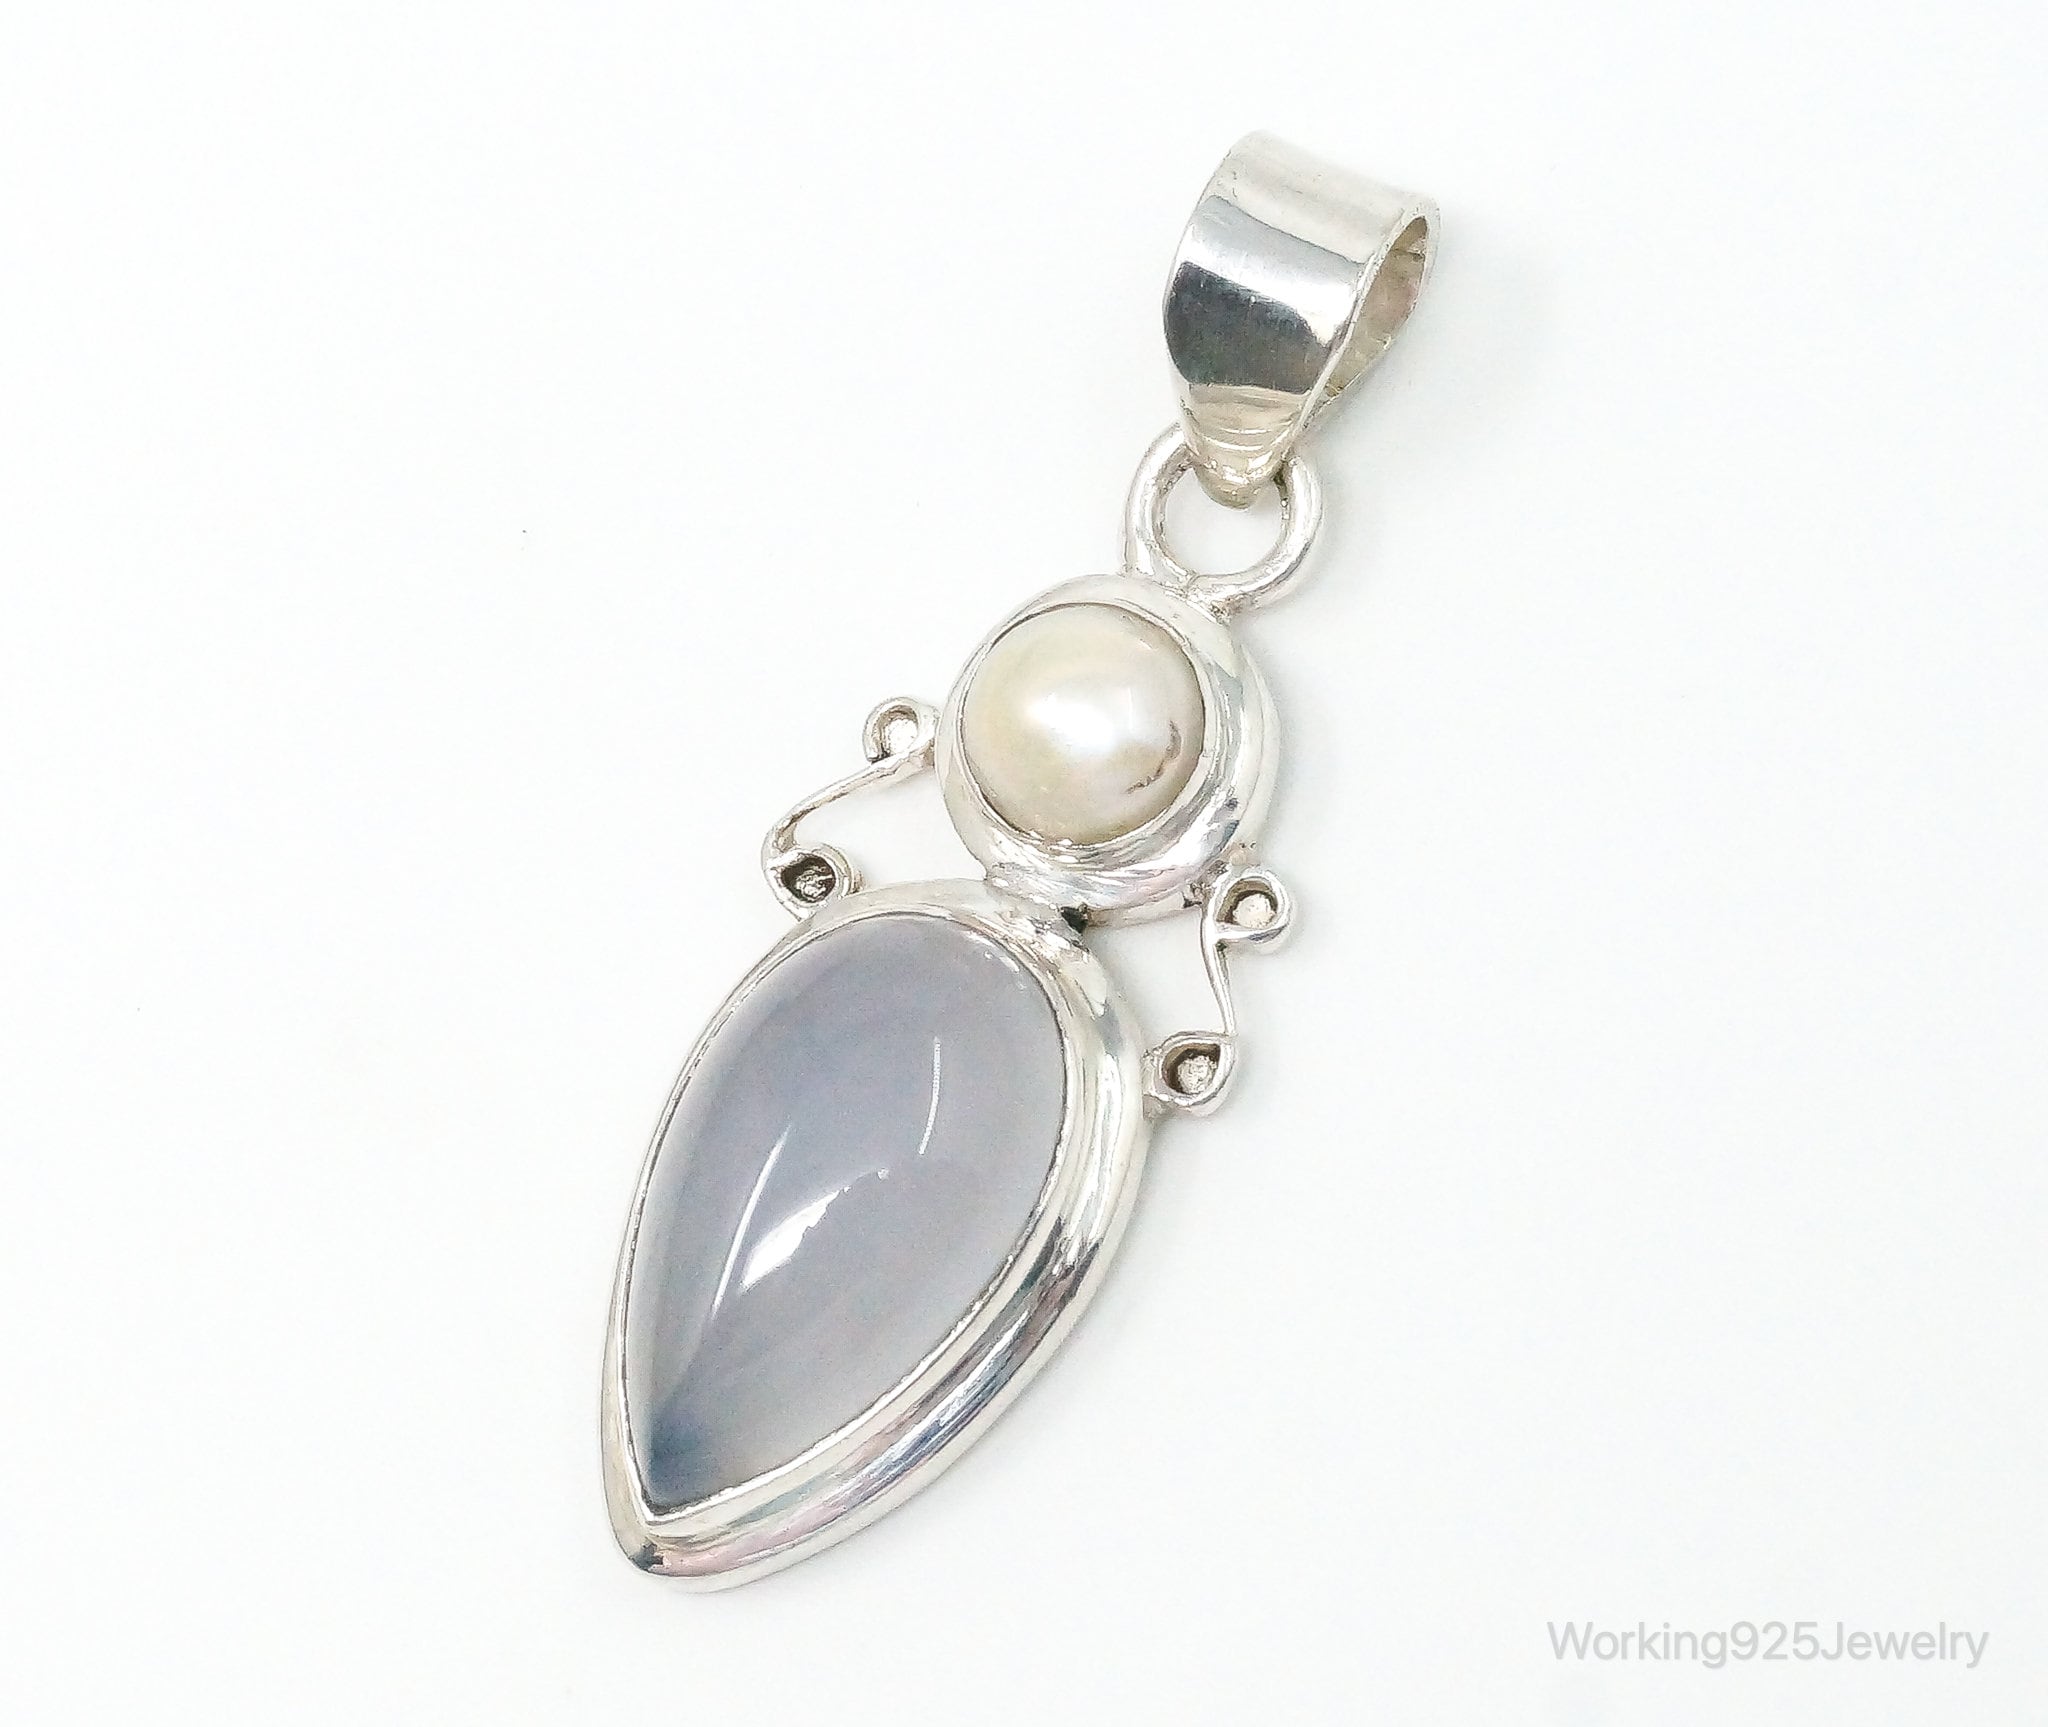 Large Designer Supreme Jewelers Blue Chalcedony Pearl Sterling Necklace Pendant